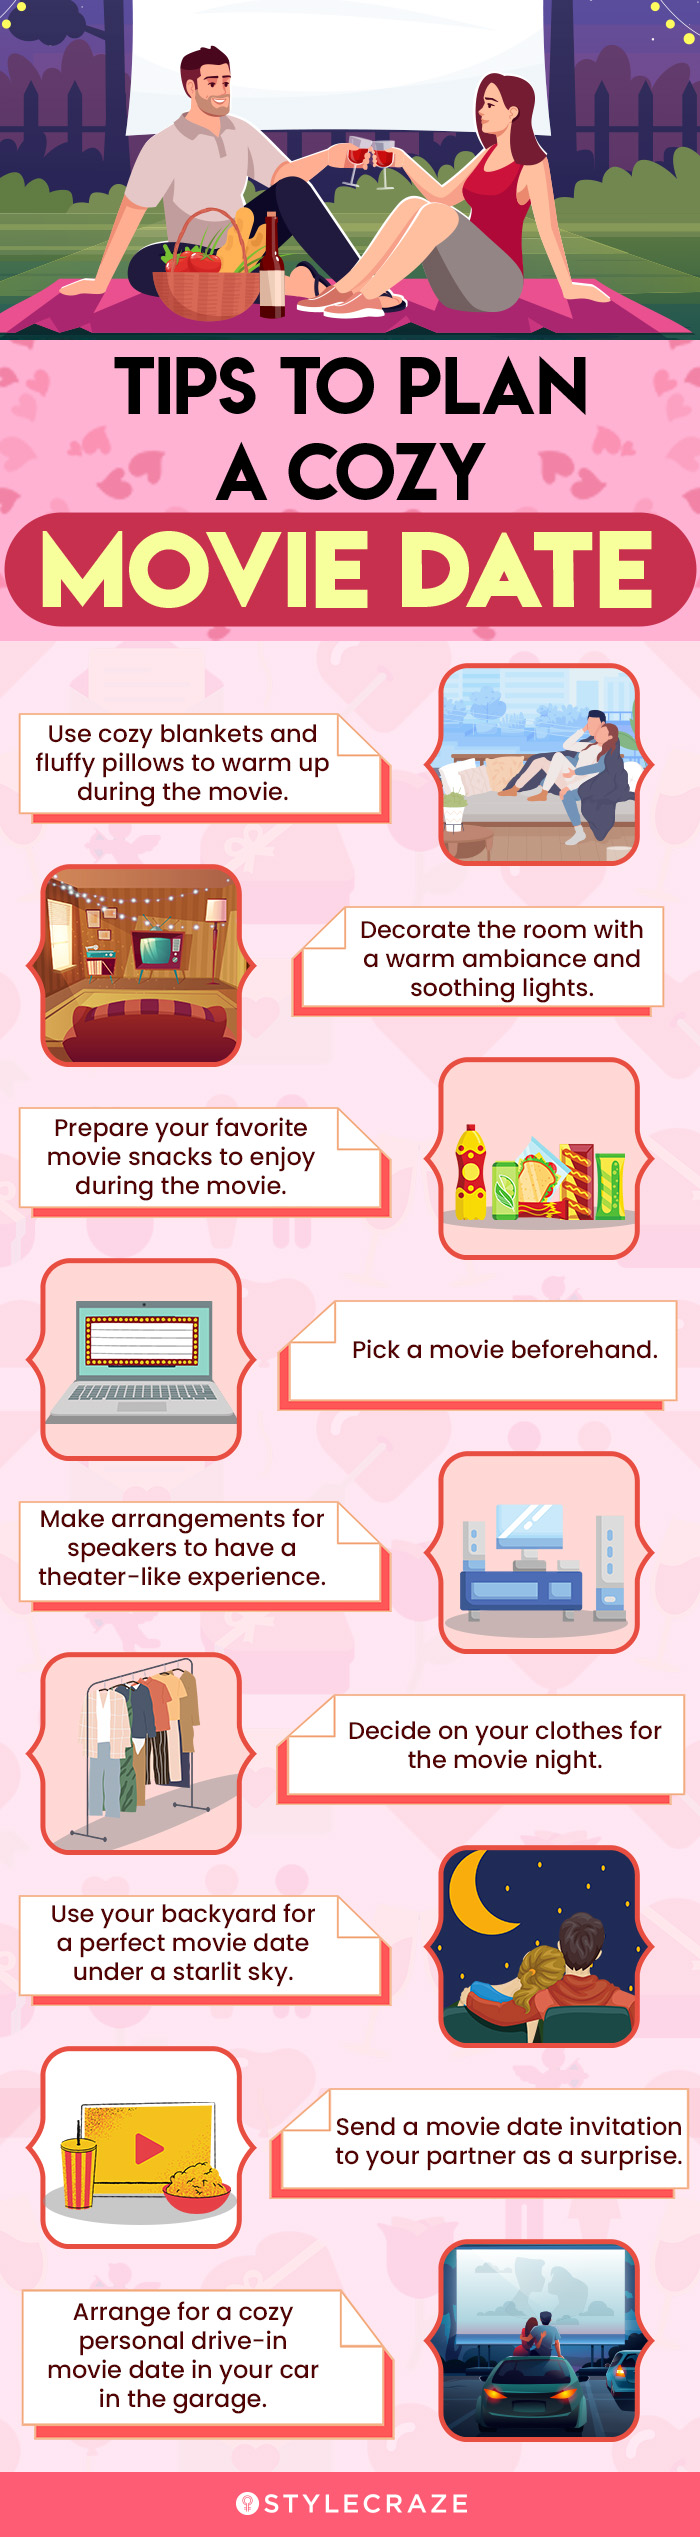 tips to plan a cozy movie date (infographic)